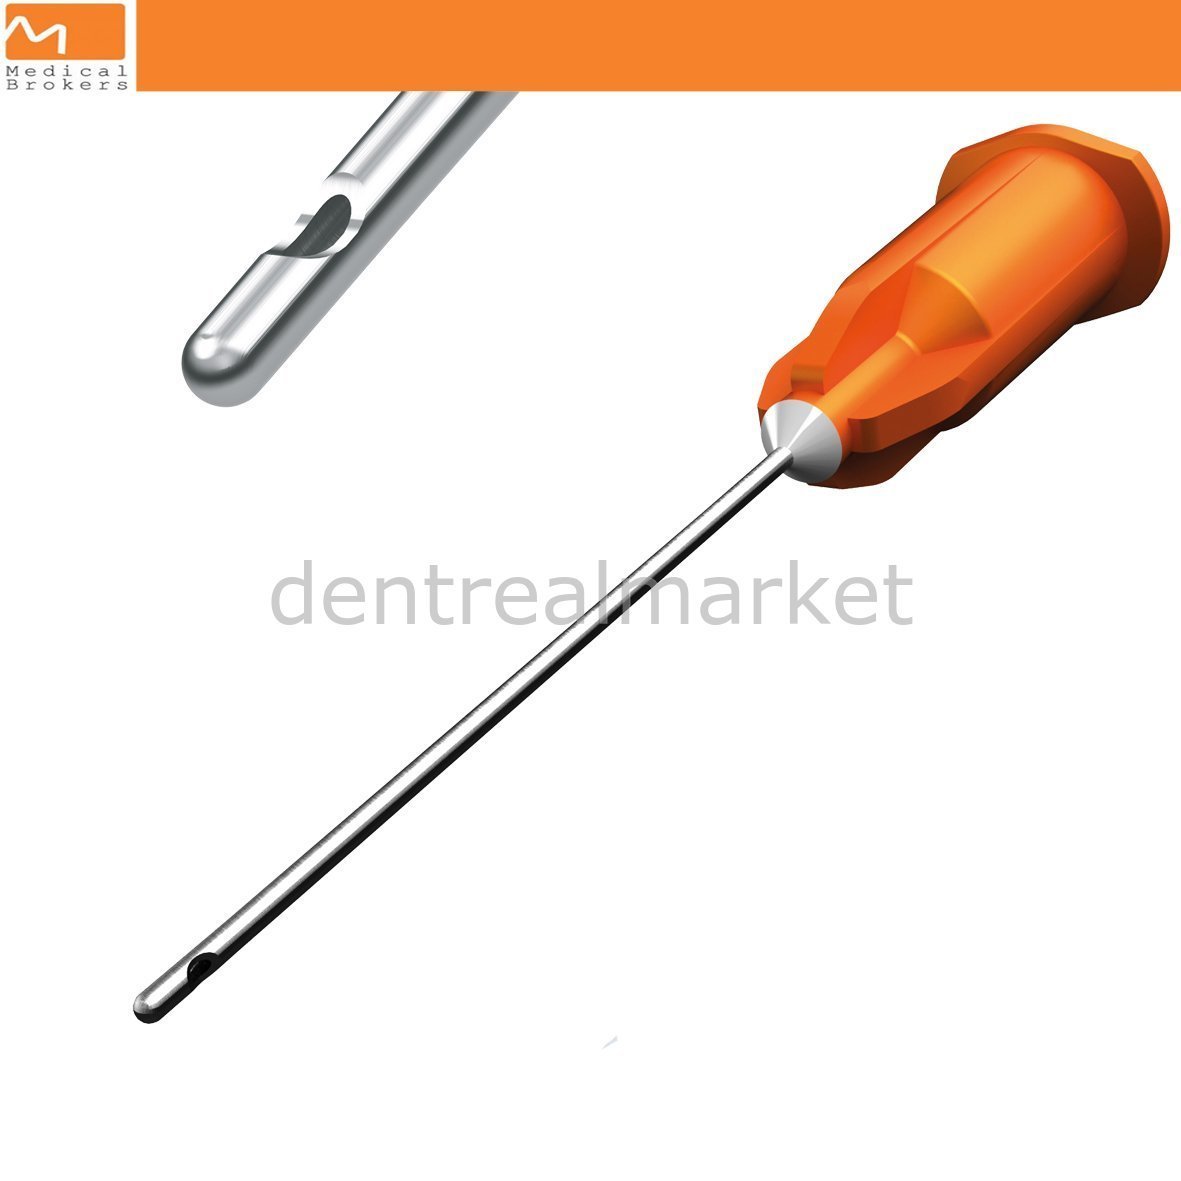 DentrealStore - Medical Brokers Endo Irrigation Needles with One Side Vent - Root Needle - Sterile İrrigation Needles -One sided-100 pcs